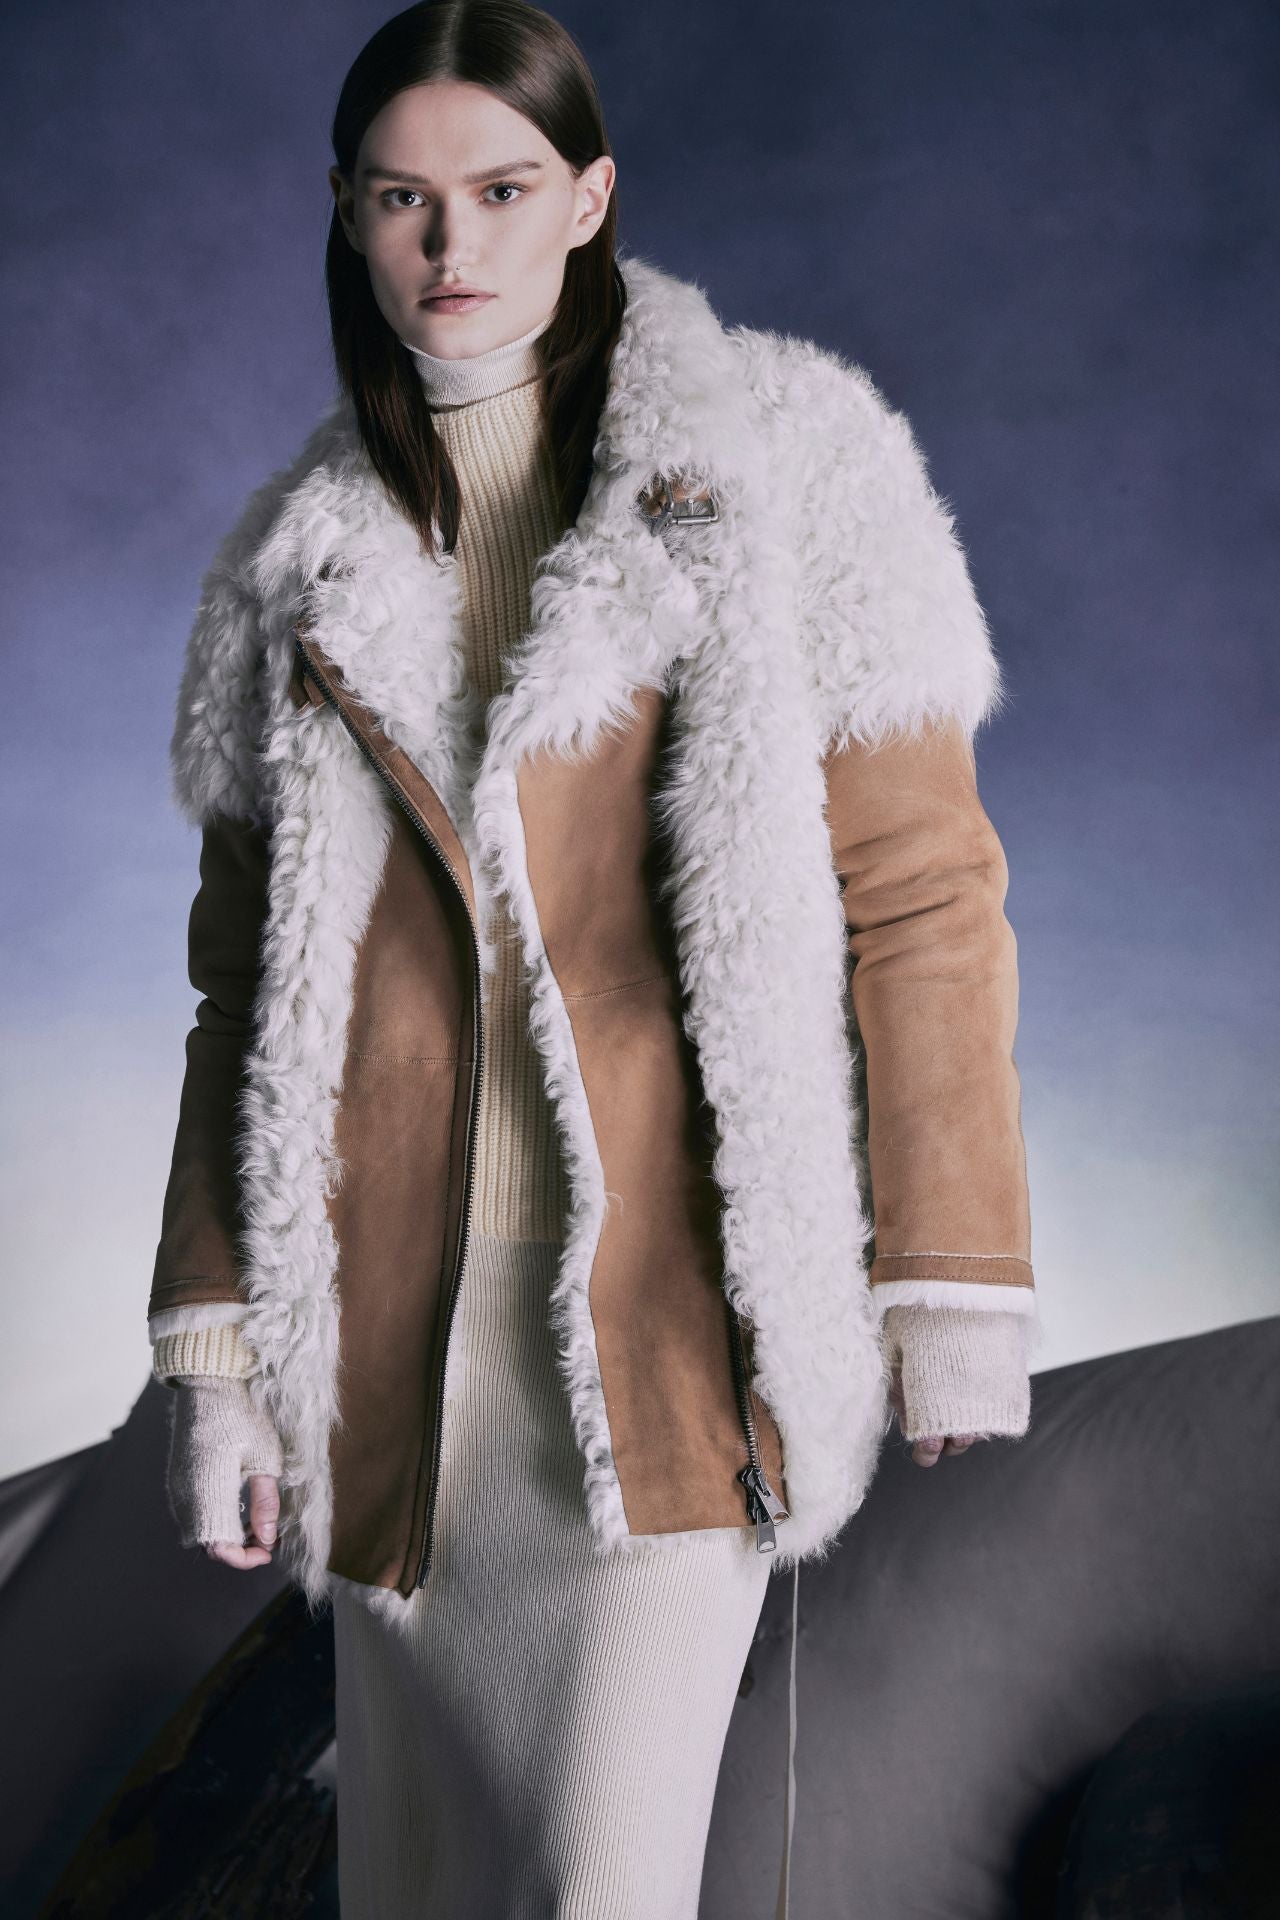 This stylish jacket is designed with an asymmetrical zip closure and waterfall collar. Crafted in genuine shearling, the jacket is finished with side zip pockets and double buckle detail at the collar. Genuine Shearling Waterfall collar Long-sleeve Zipper closure